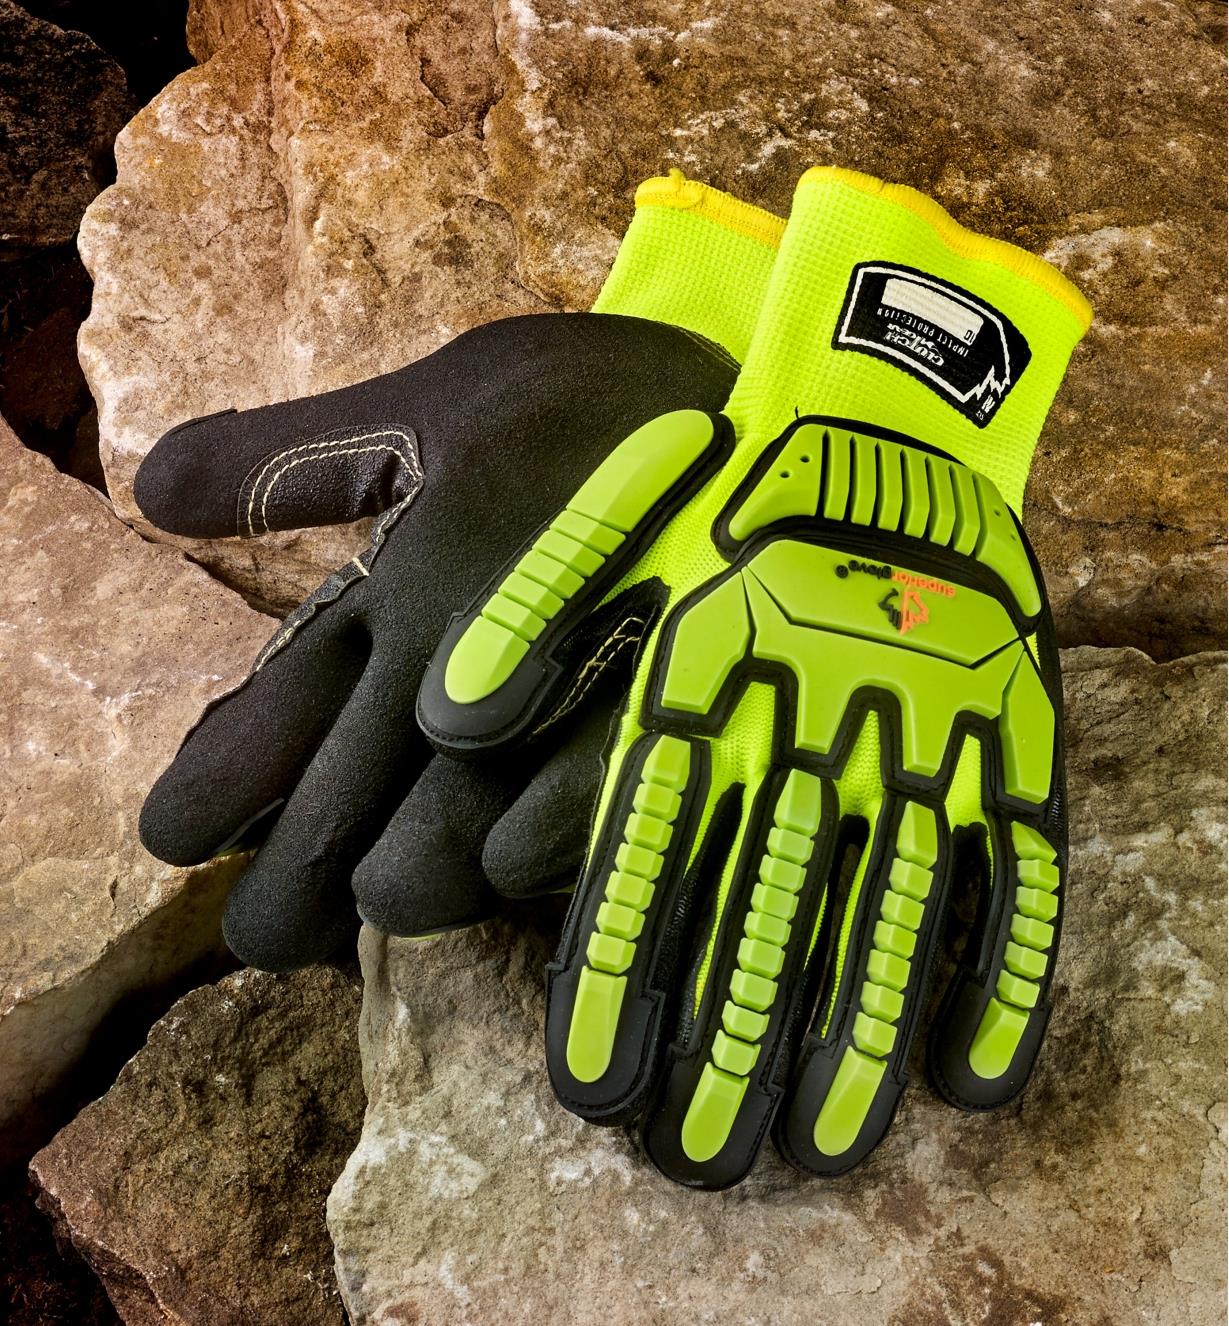 Clutch Gear Impact-Resistant Gloves